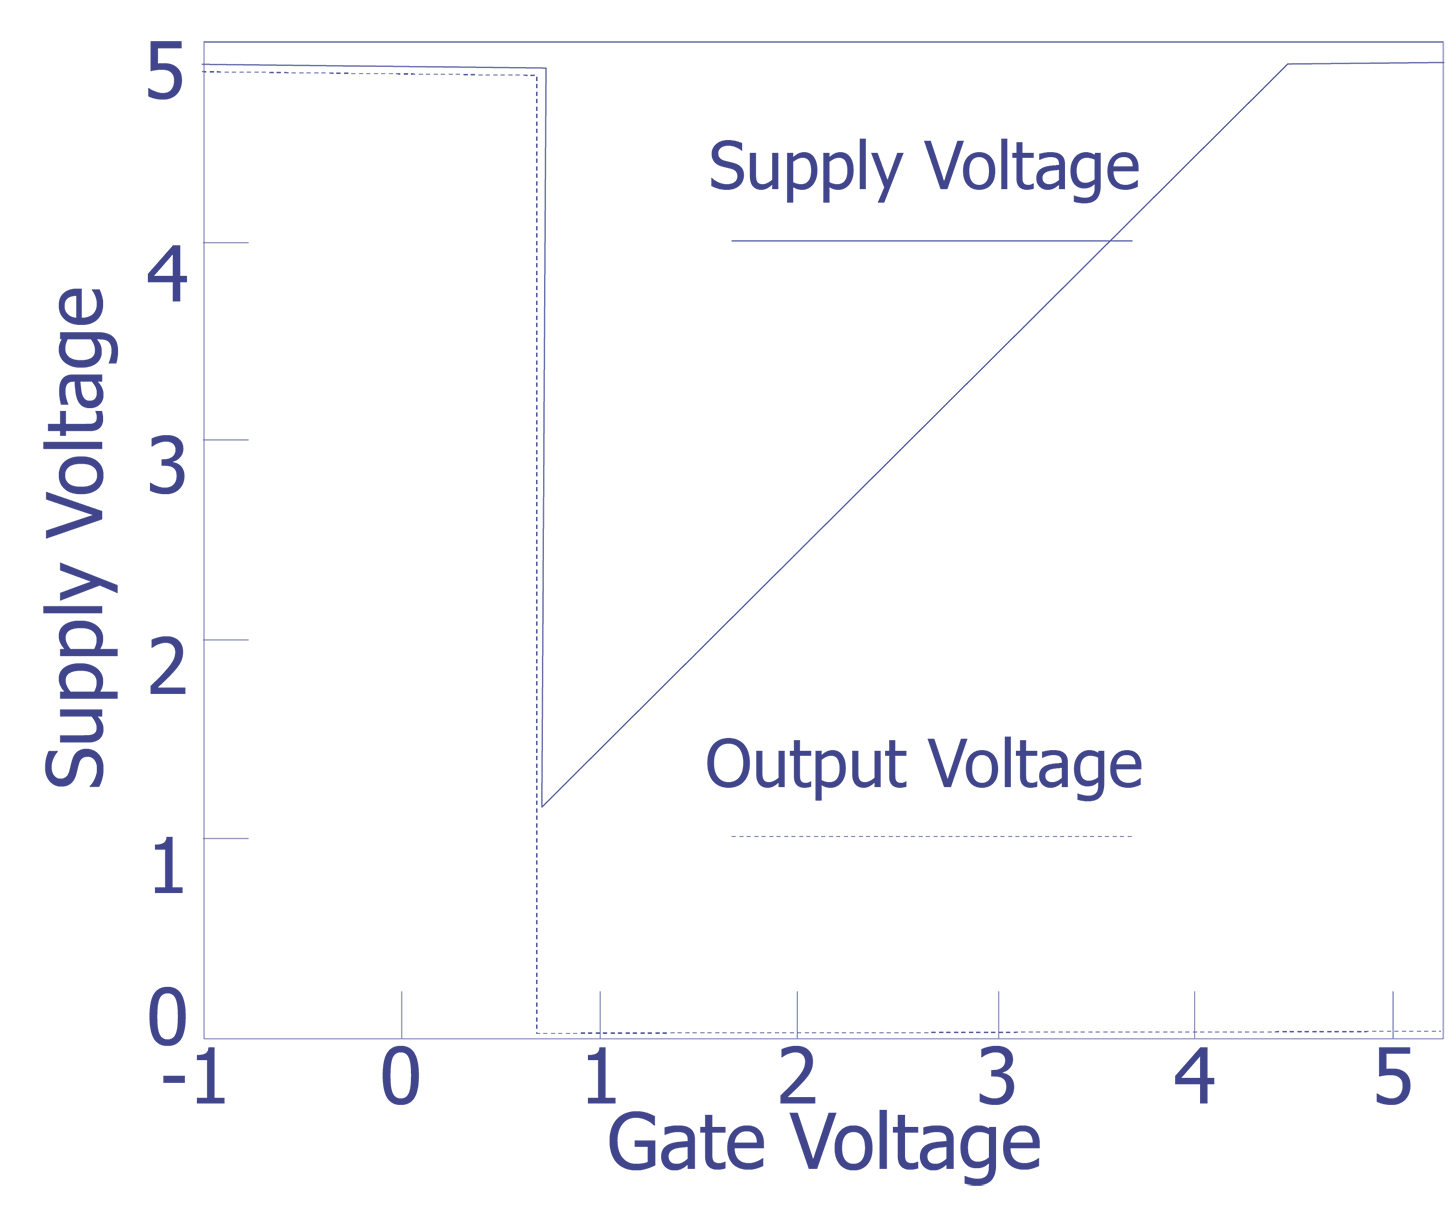 Supply and output voltages of the inverter as a function of gate voltage with both gates tied together.